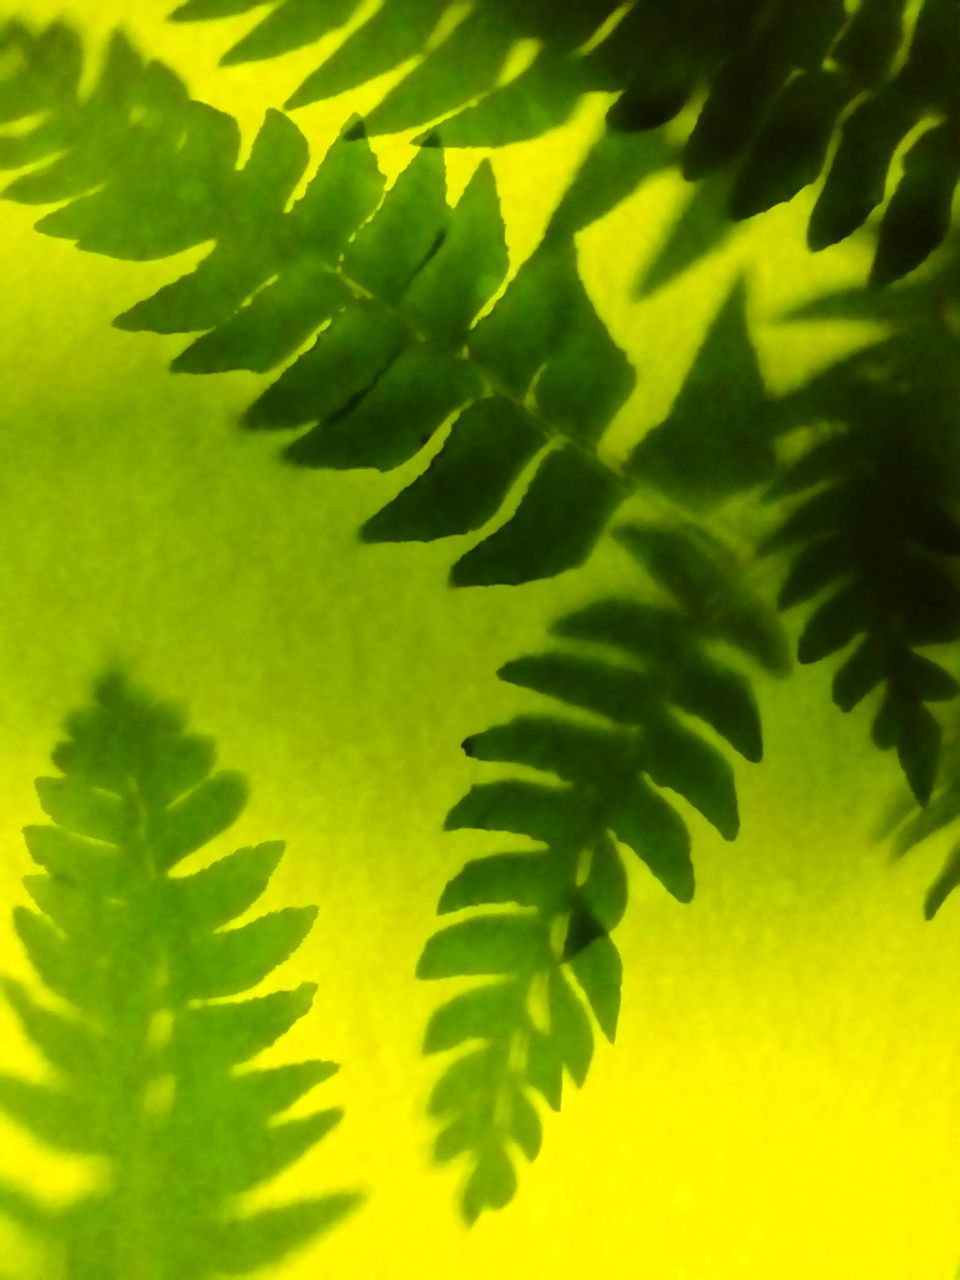 CLOSE-UP OF FERN GREEN LEAVES